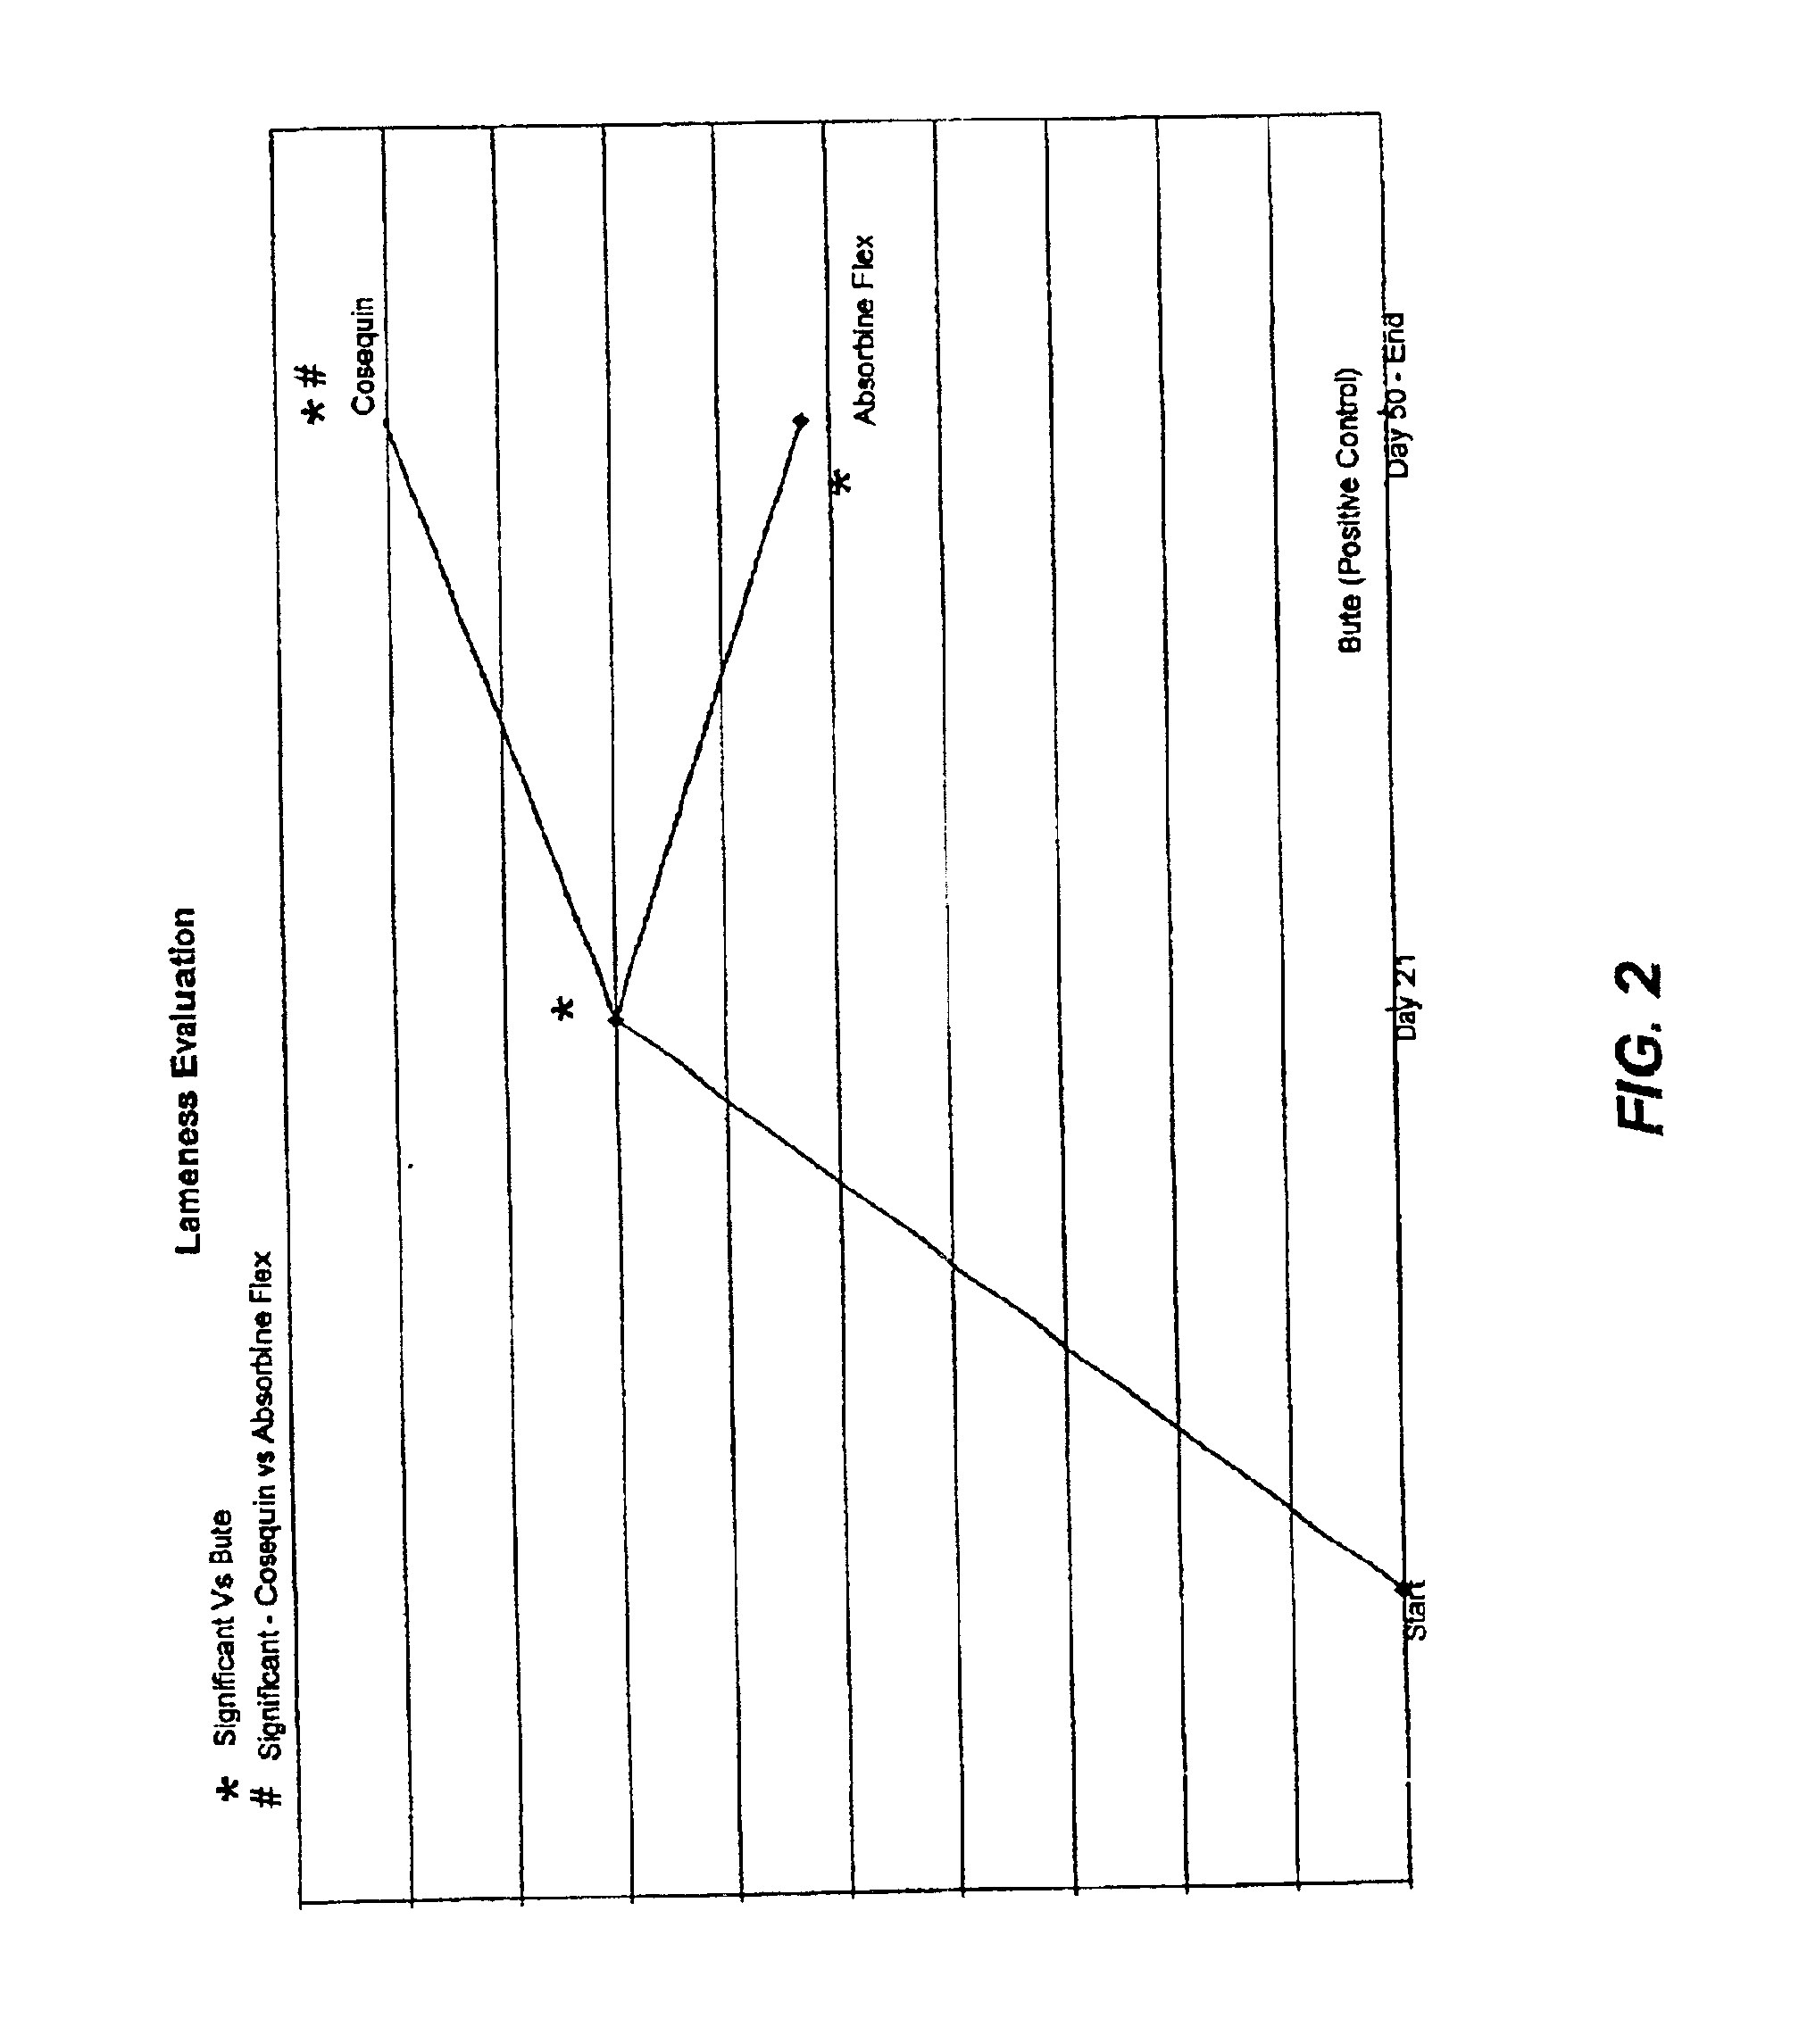 Methods for treating joint inflammation, pain, and loss of mobility